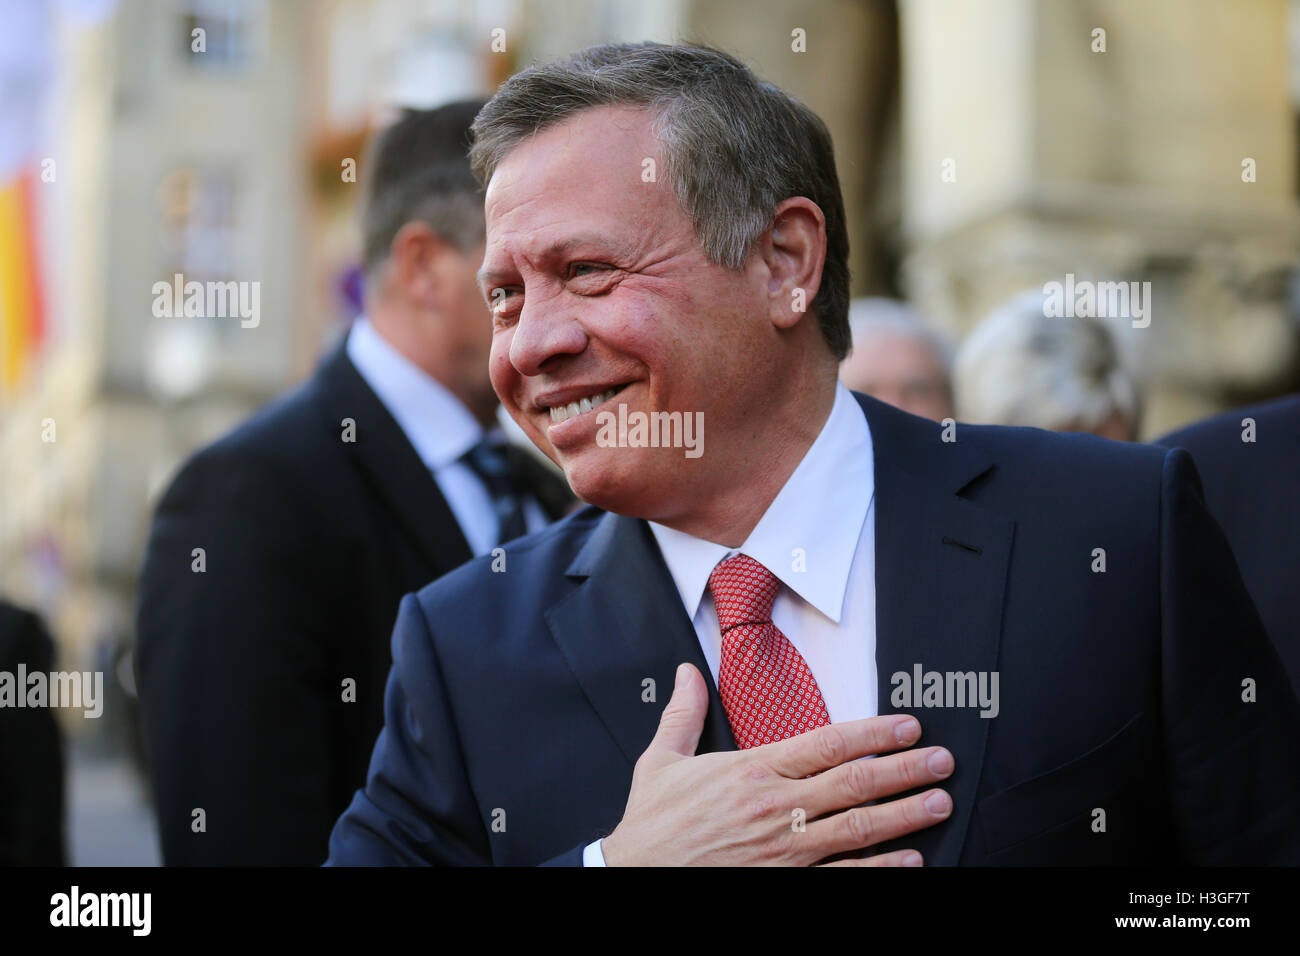 Muenster, Germany. 08th Oct, 2016. King Abdullah II of Jordan smiles as he arrives at the award ceremony of the Westfaelischer Friedenspreises (lit. Westphalian Peace Prize) in Muenster, Germany, 8 October 2106. He received the award for his mediating role in the Middle East. PHOTO: INA FASSBENDER/DPA Credit:  dpa picture alliance/Alamy Live News Stock Photo